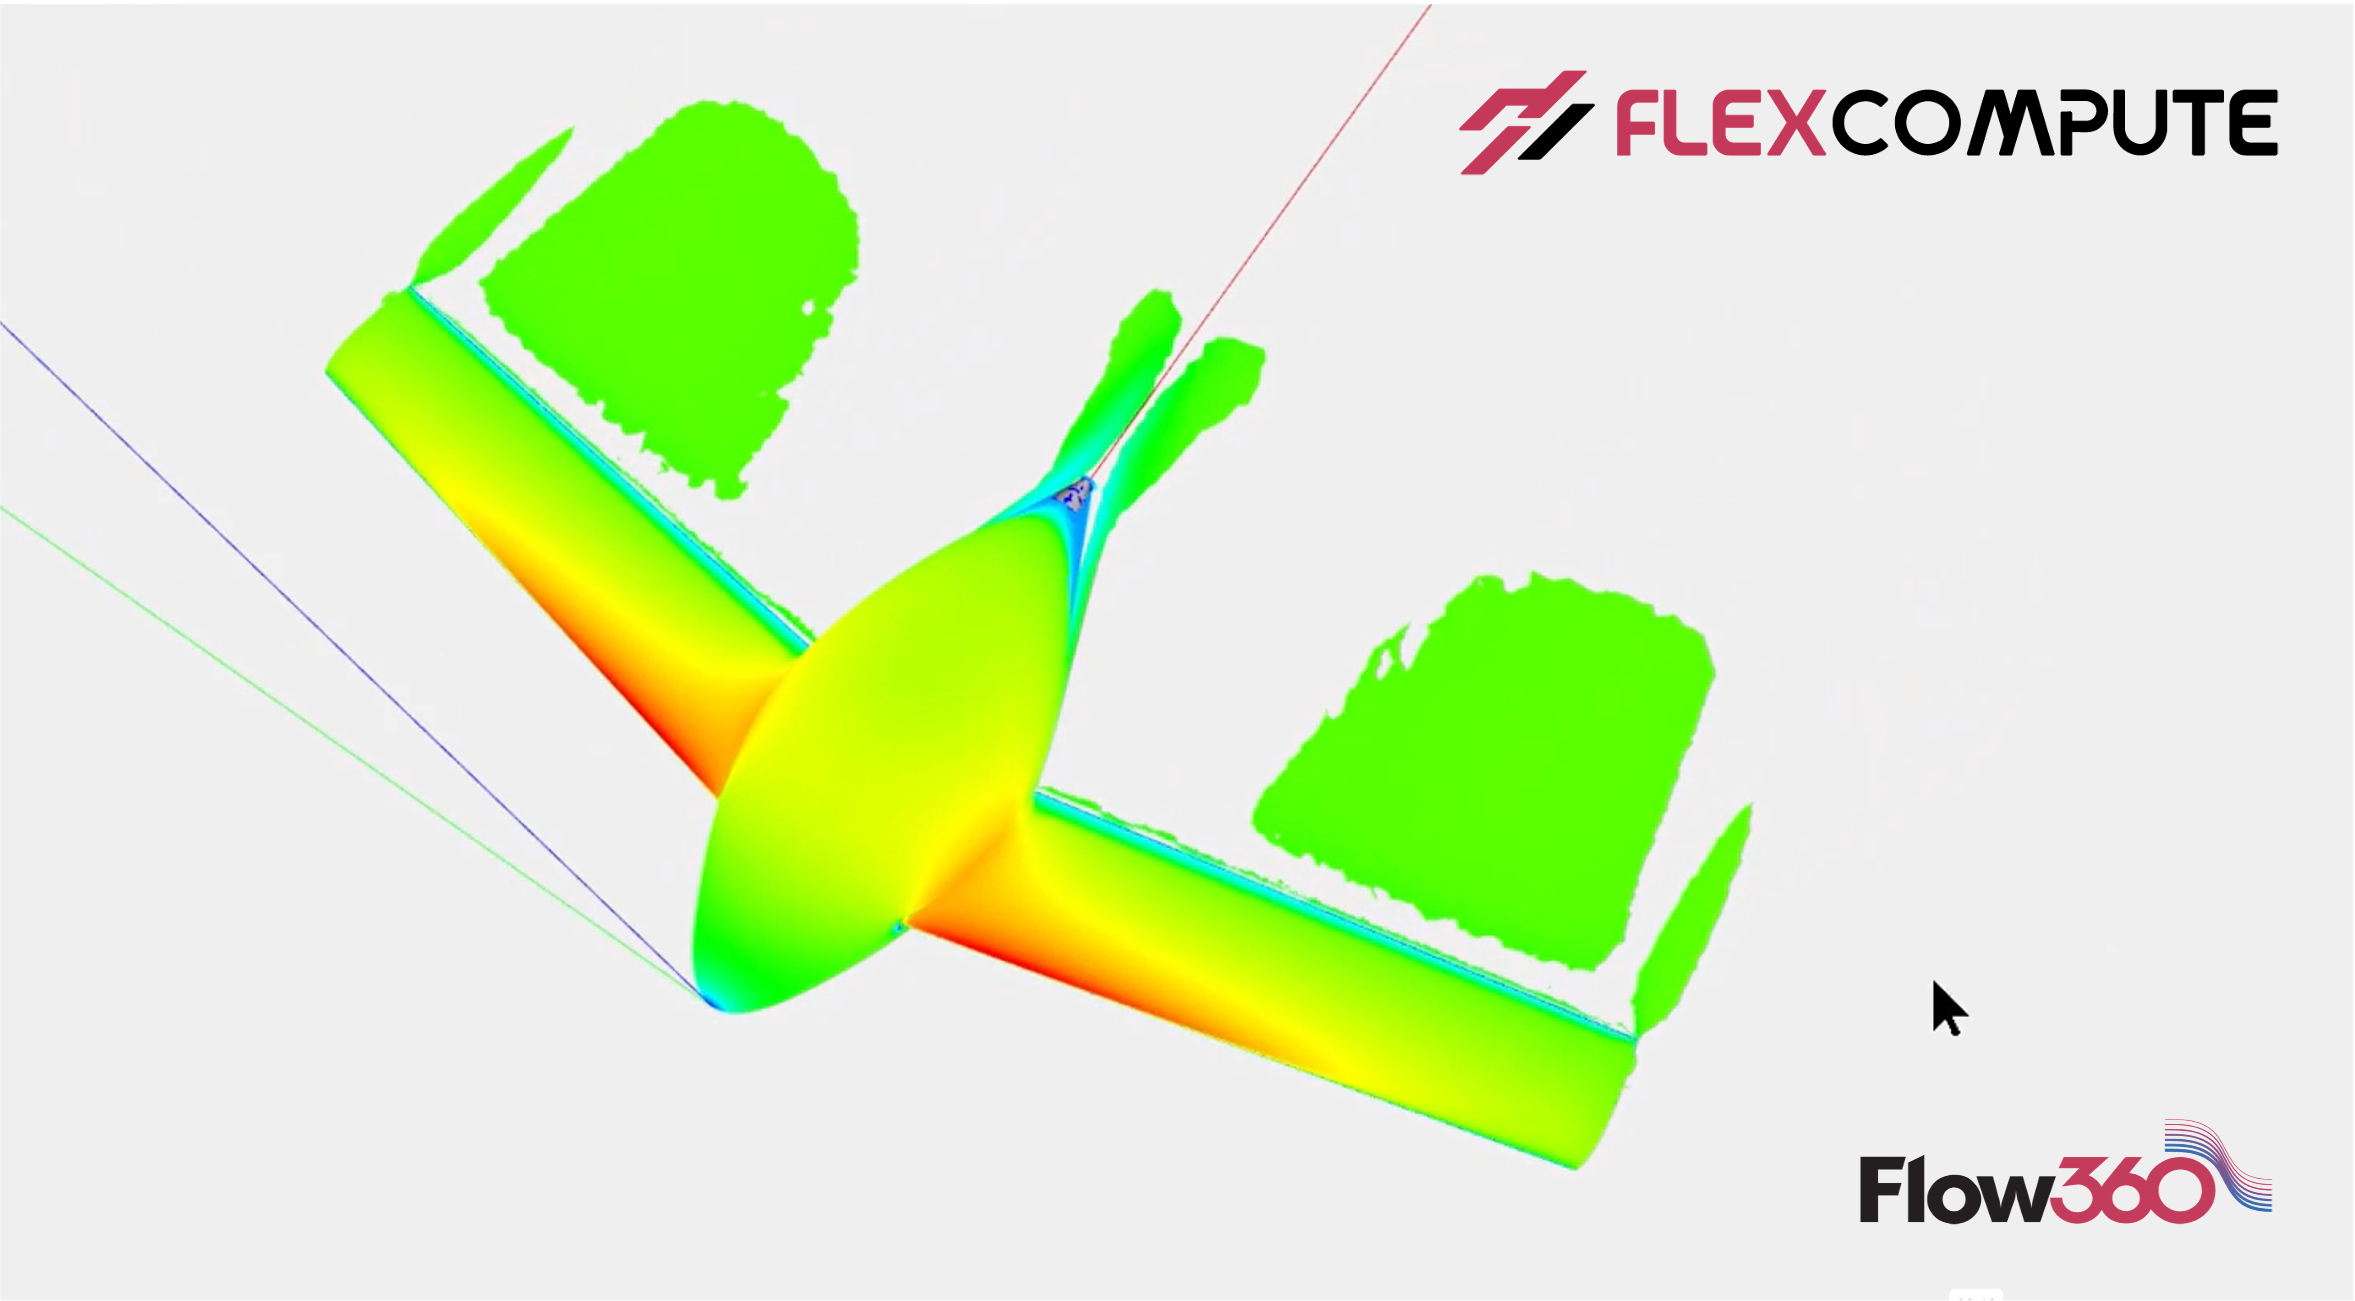 Lecture 4: How to Run a CFD Simulation in Flow360 and Visualize the Results